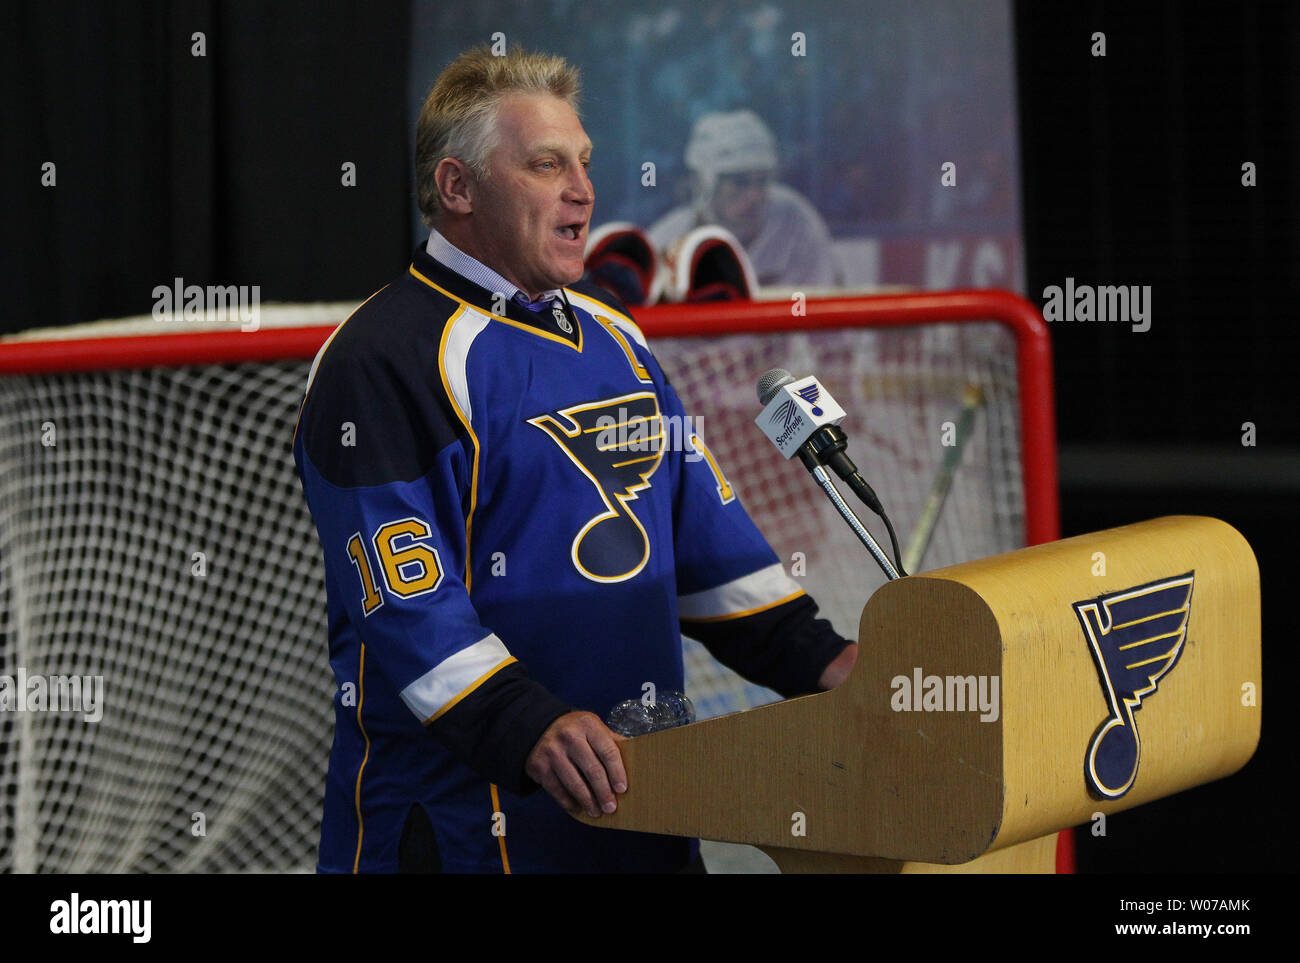 Former St. Louis Blues Brett Hull smiles as he does a television interview,  after being named Executive Vice President with the club, at the Scottrade  Center in St. Louis on September 9